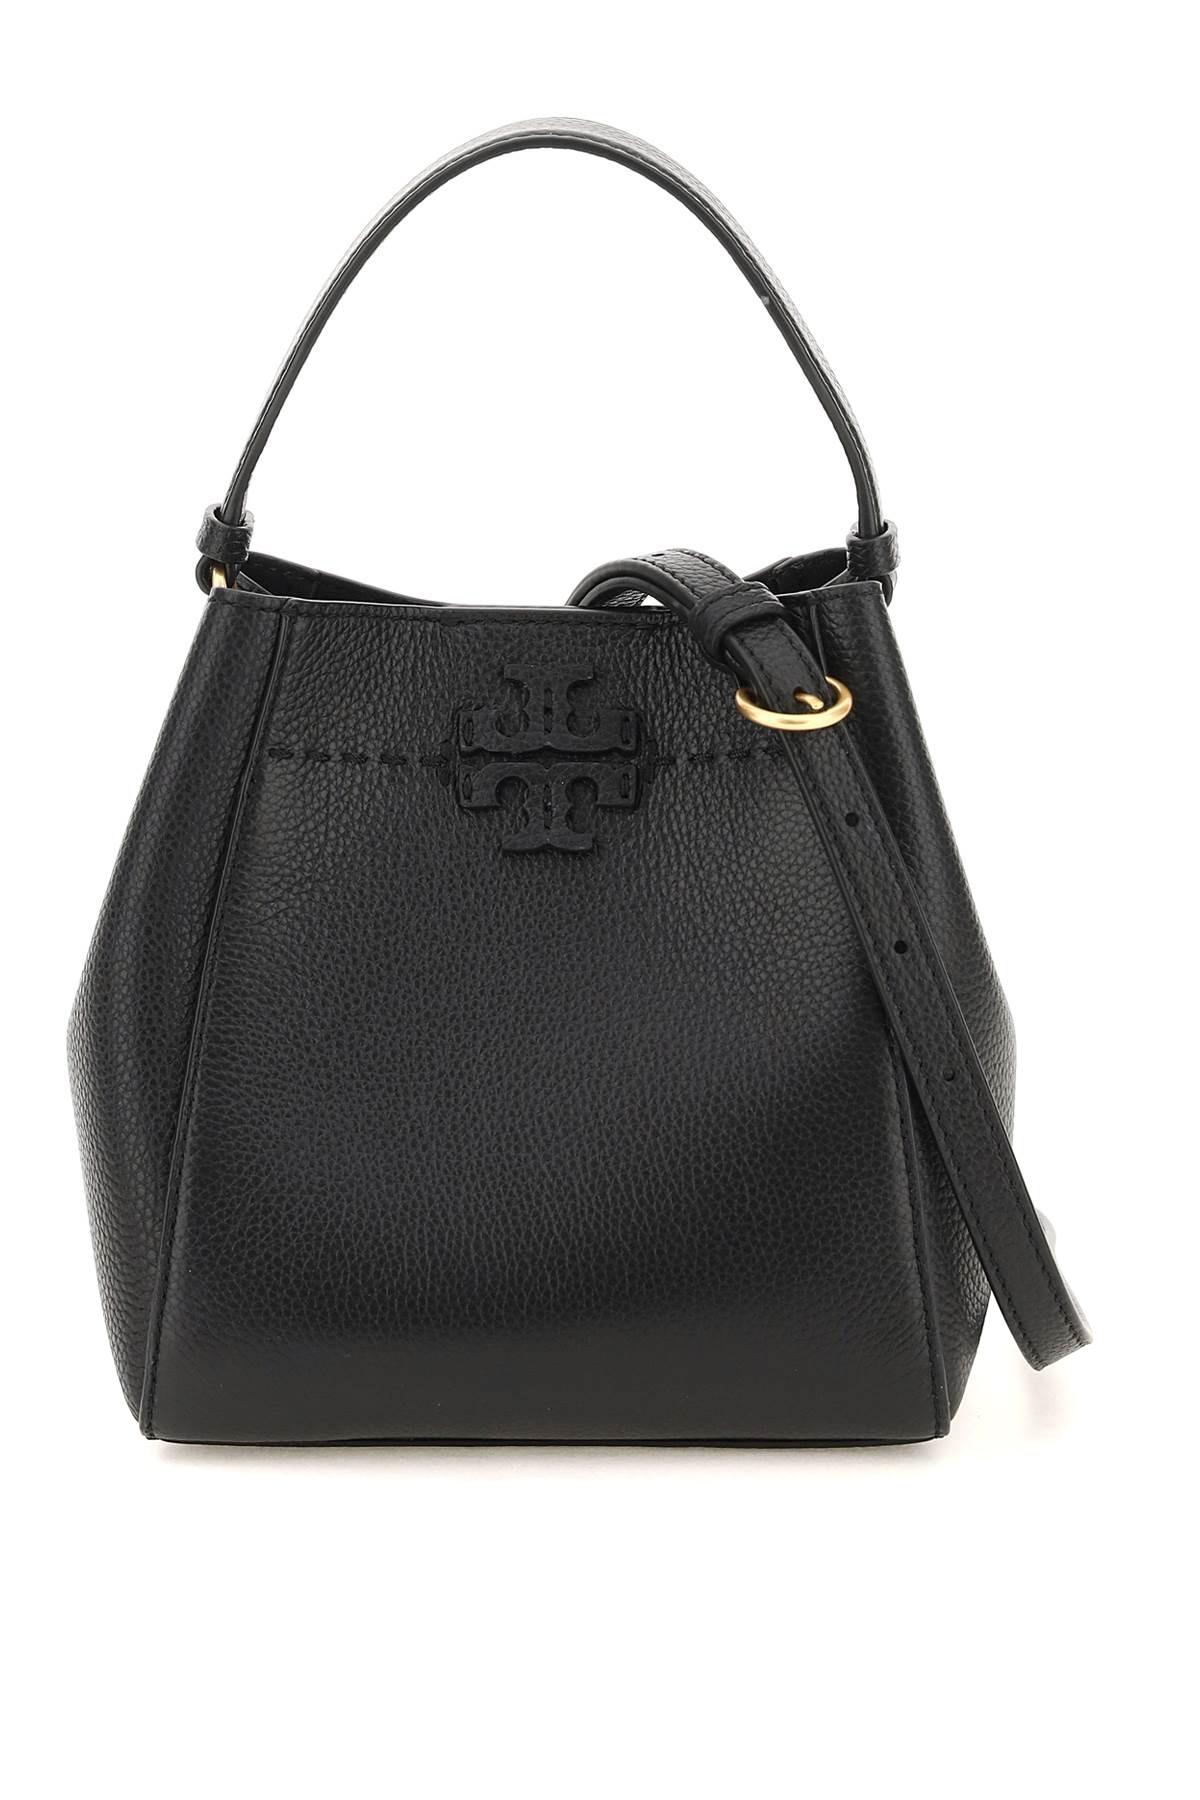 Tory Burch Grained Leather Mcgraw Bucket Bag in Black | Lyst UK